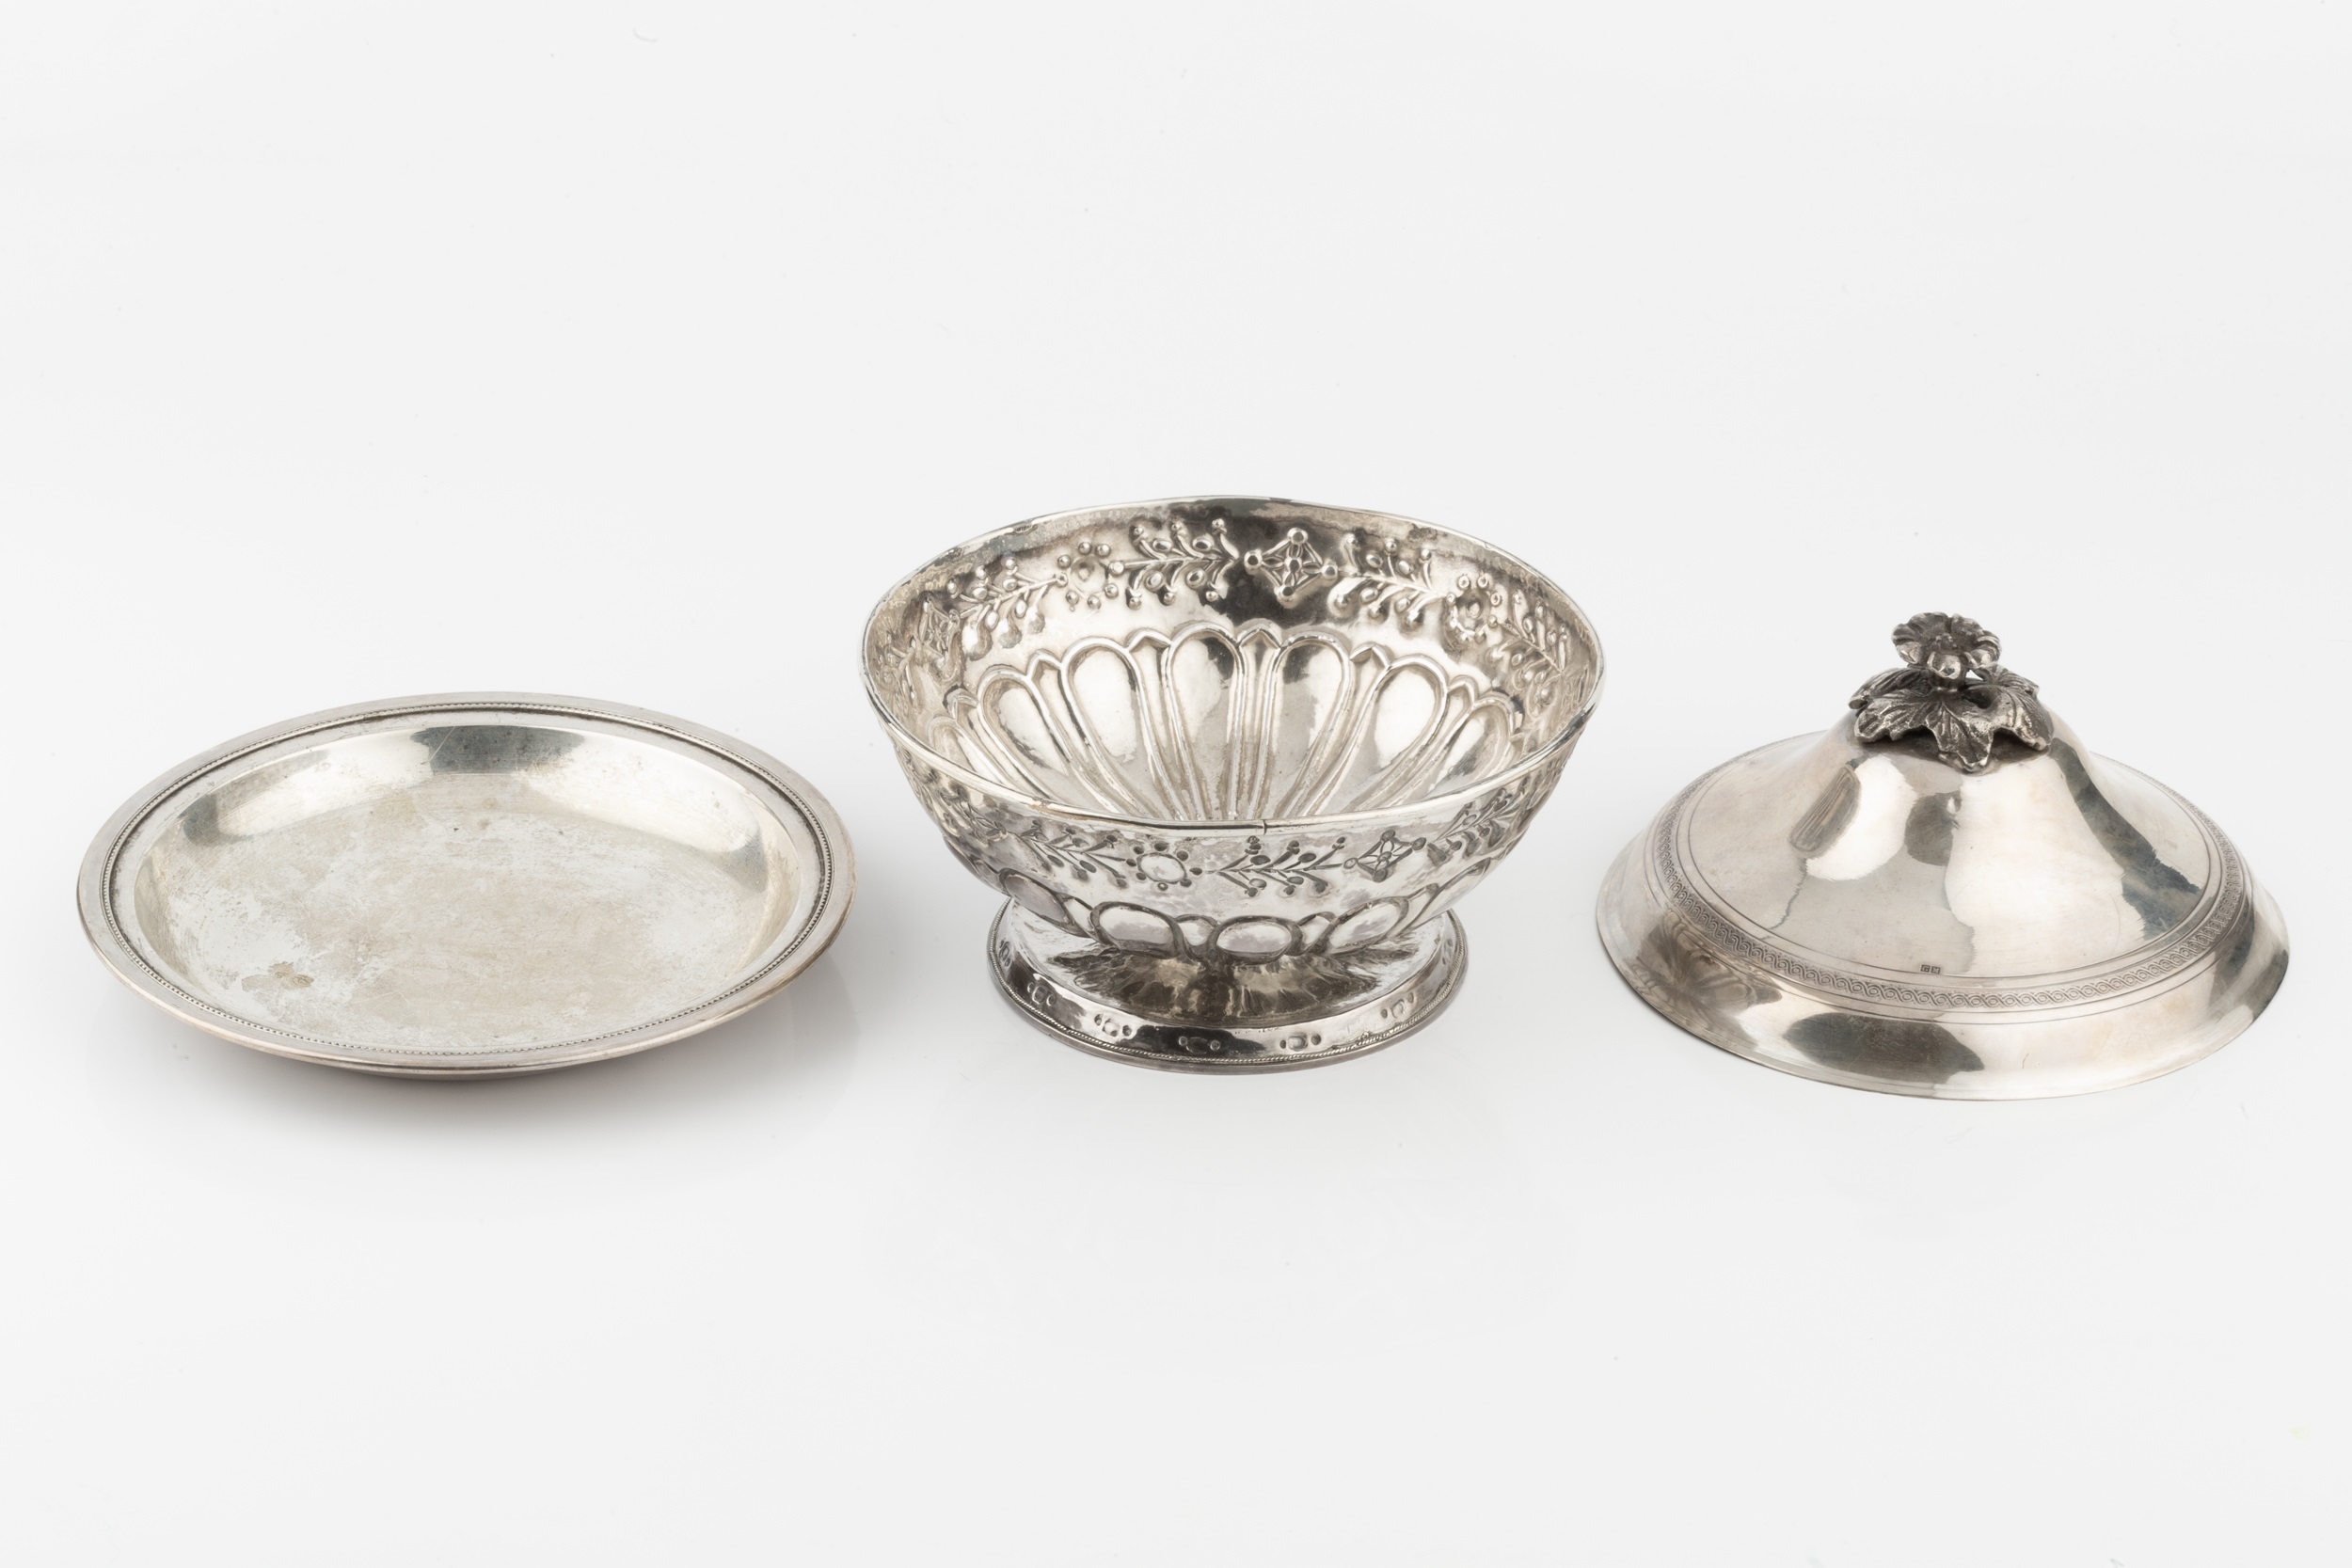 An Egyptian silver circular dish and cover, with flower cast finial and engraved borders, 15.5cm - Image 2 of 4